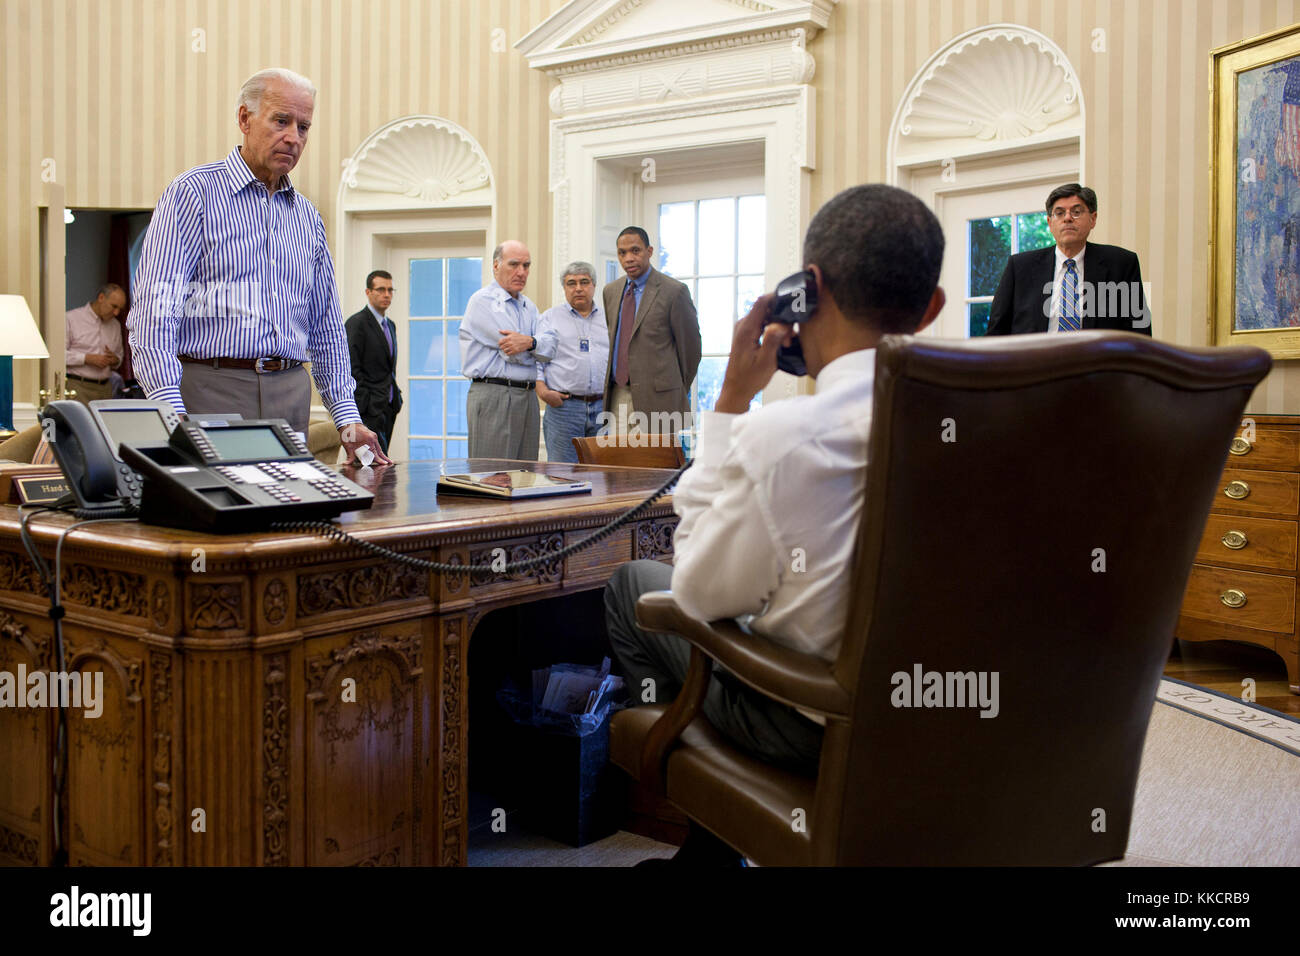 July 31, 2011 'The Vice President and other staff watch and listen as the President talks on the phone in the Oval Office with Senate Majority Leader Harry Reid during the debt limit and deficit discussions.' Stock Photo